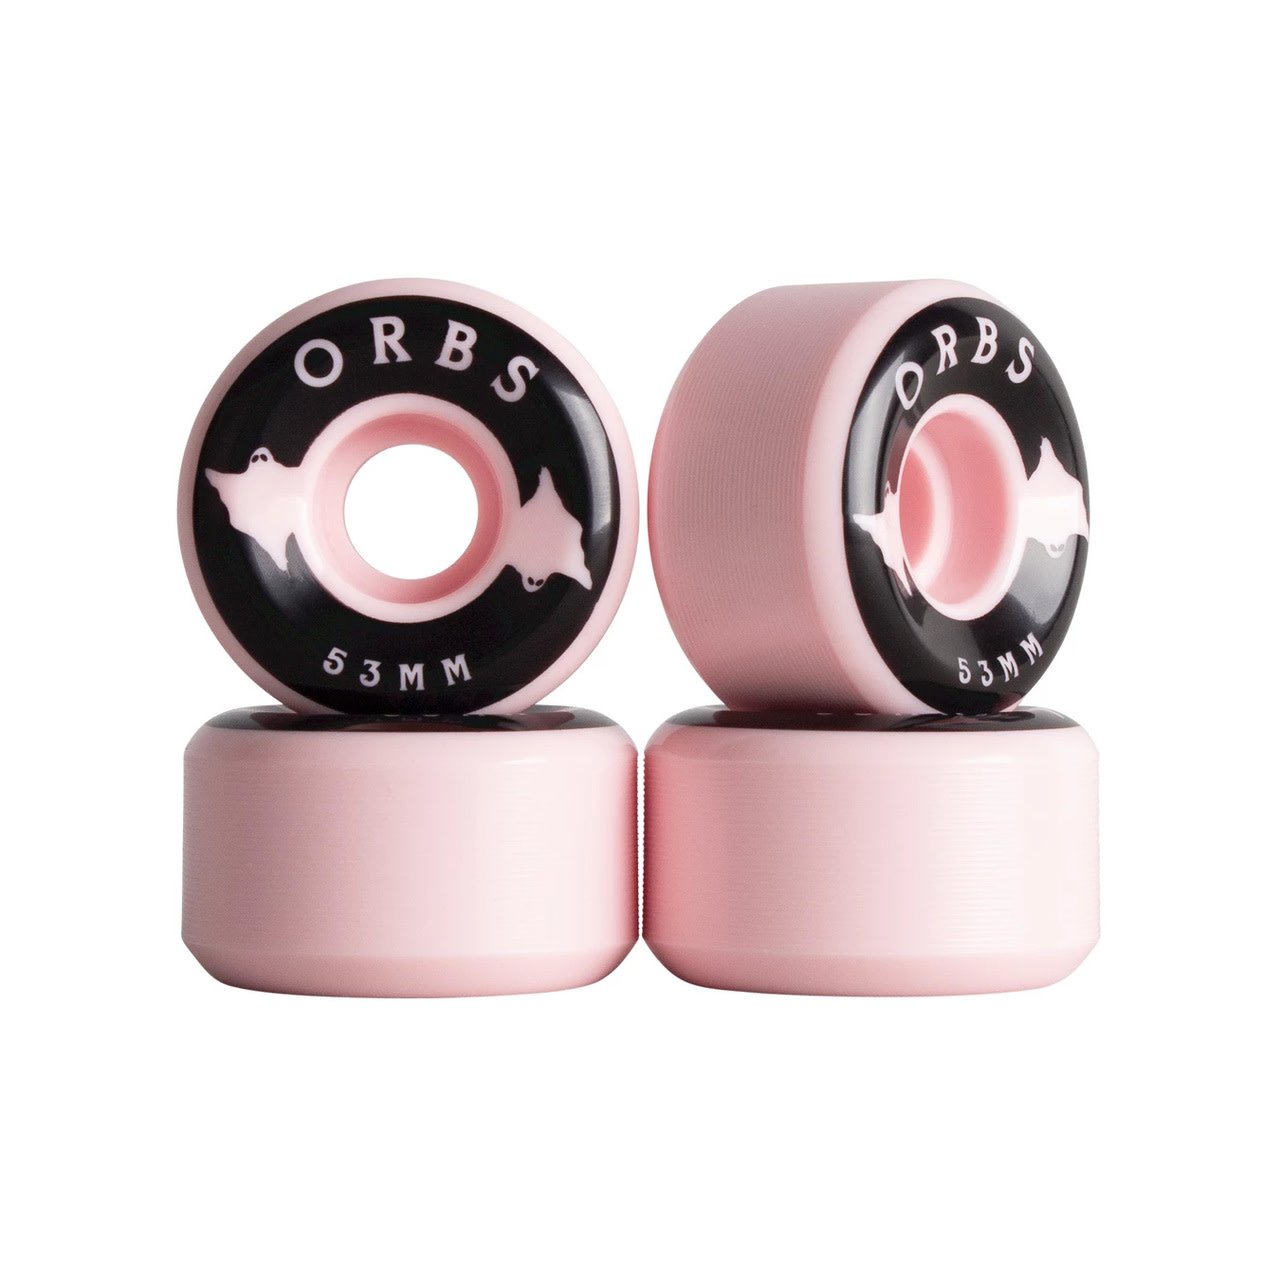 Welcome Skateboards Orbs Specters Light Pink 53mm